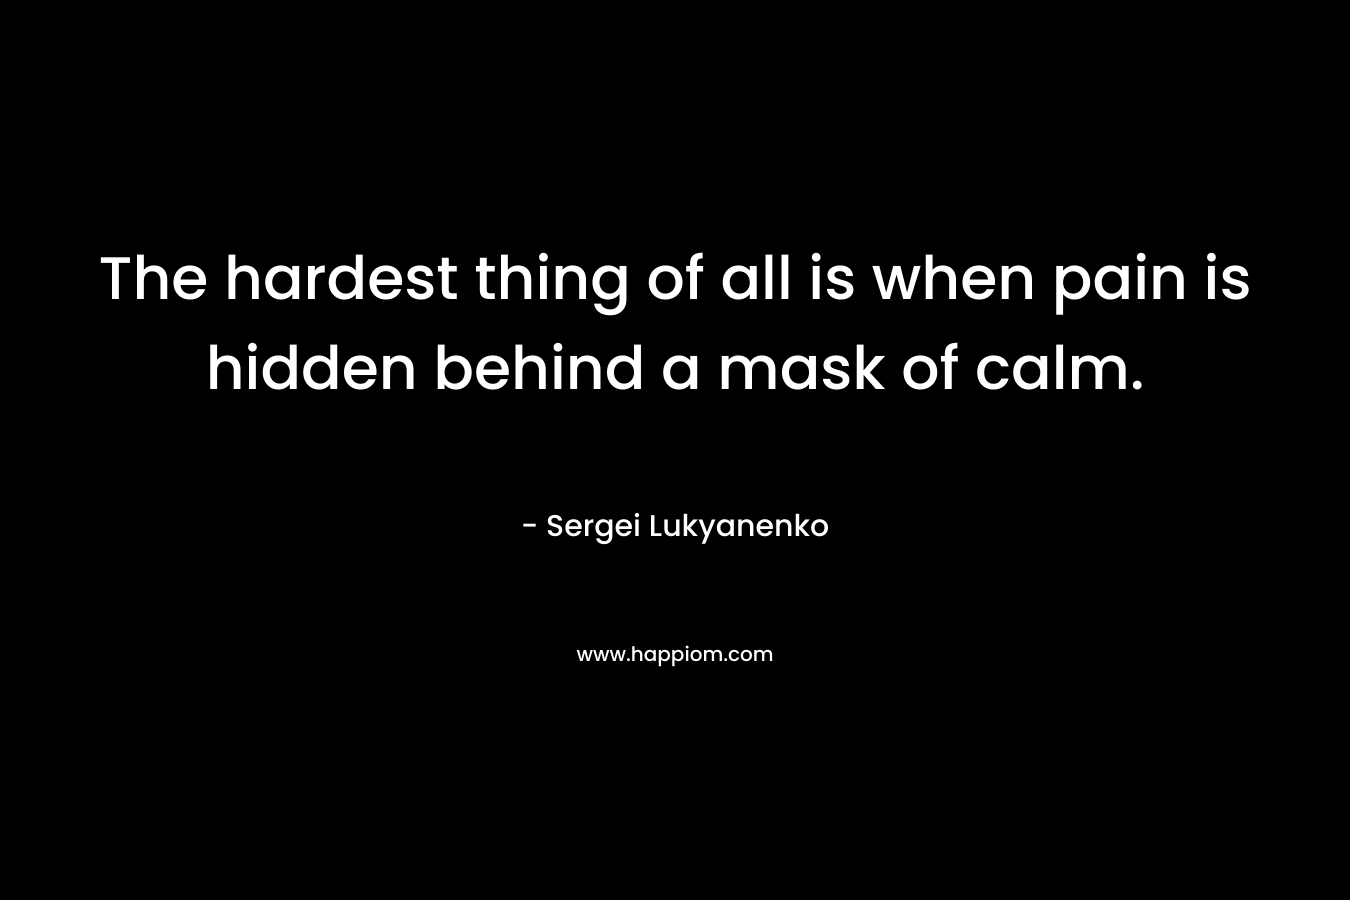 The hardest thing of all is when pain is hidden behind a mask of calm. – Sergei Lukyanenko